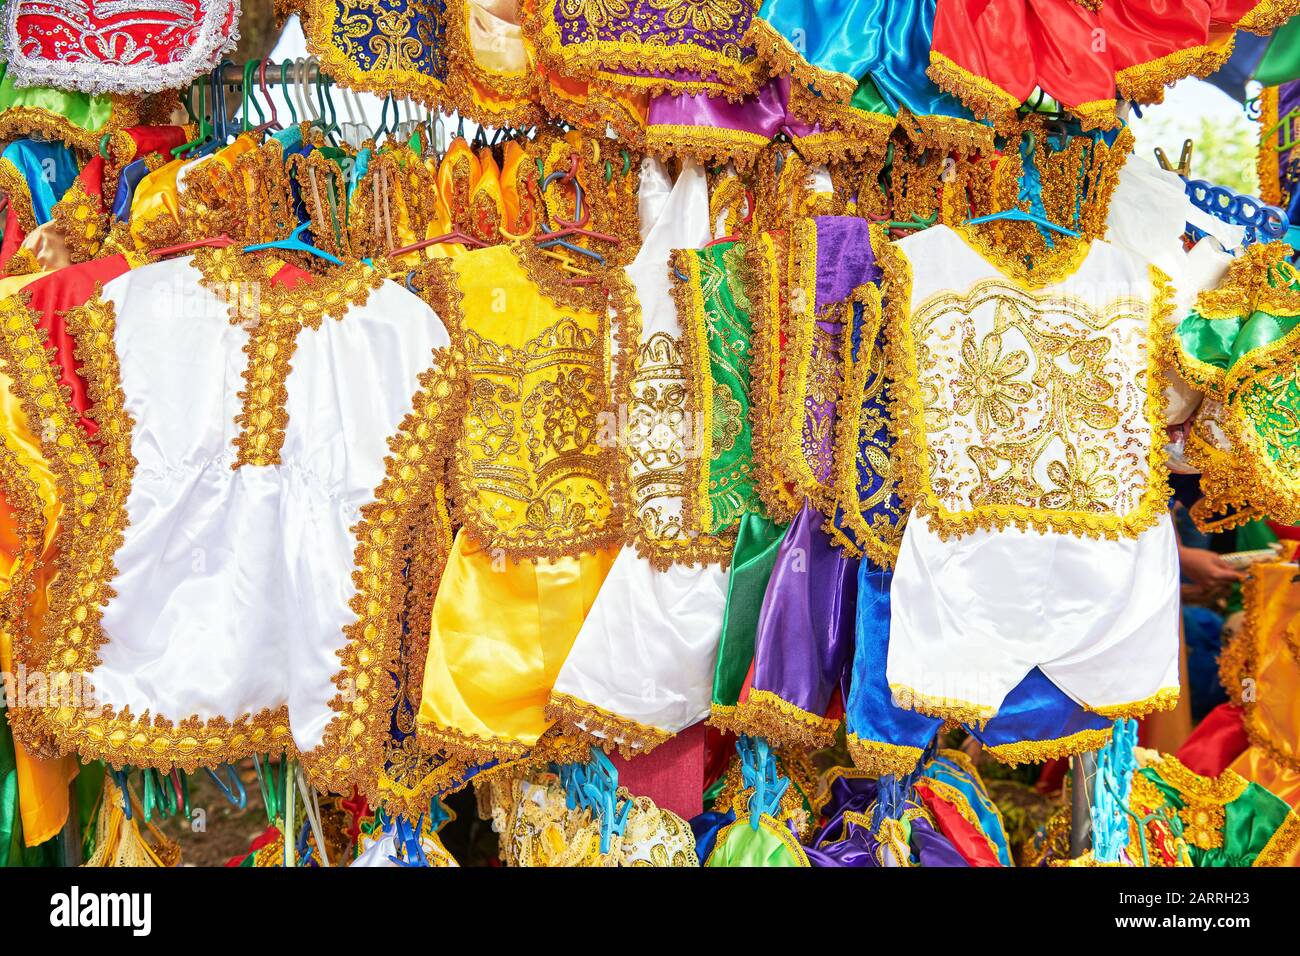 Colorful festive handmade dresses for children are sold in honor of Santo Nino at a stand at the Ati-Atihan Festival in Ibajay, Philippines Stock Photo